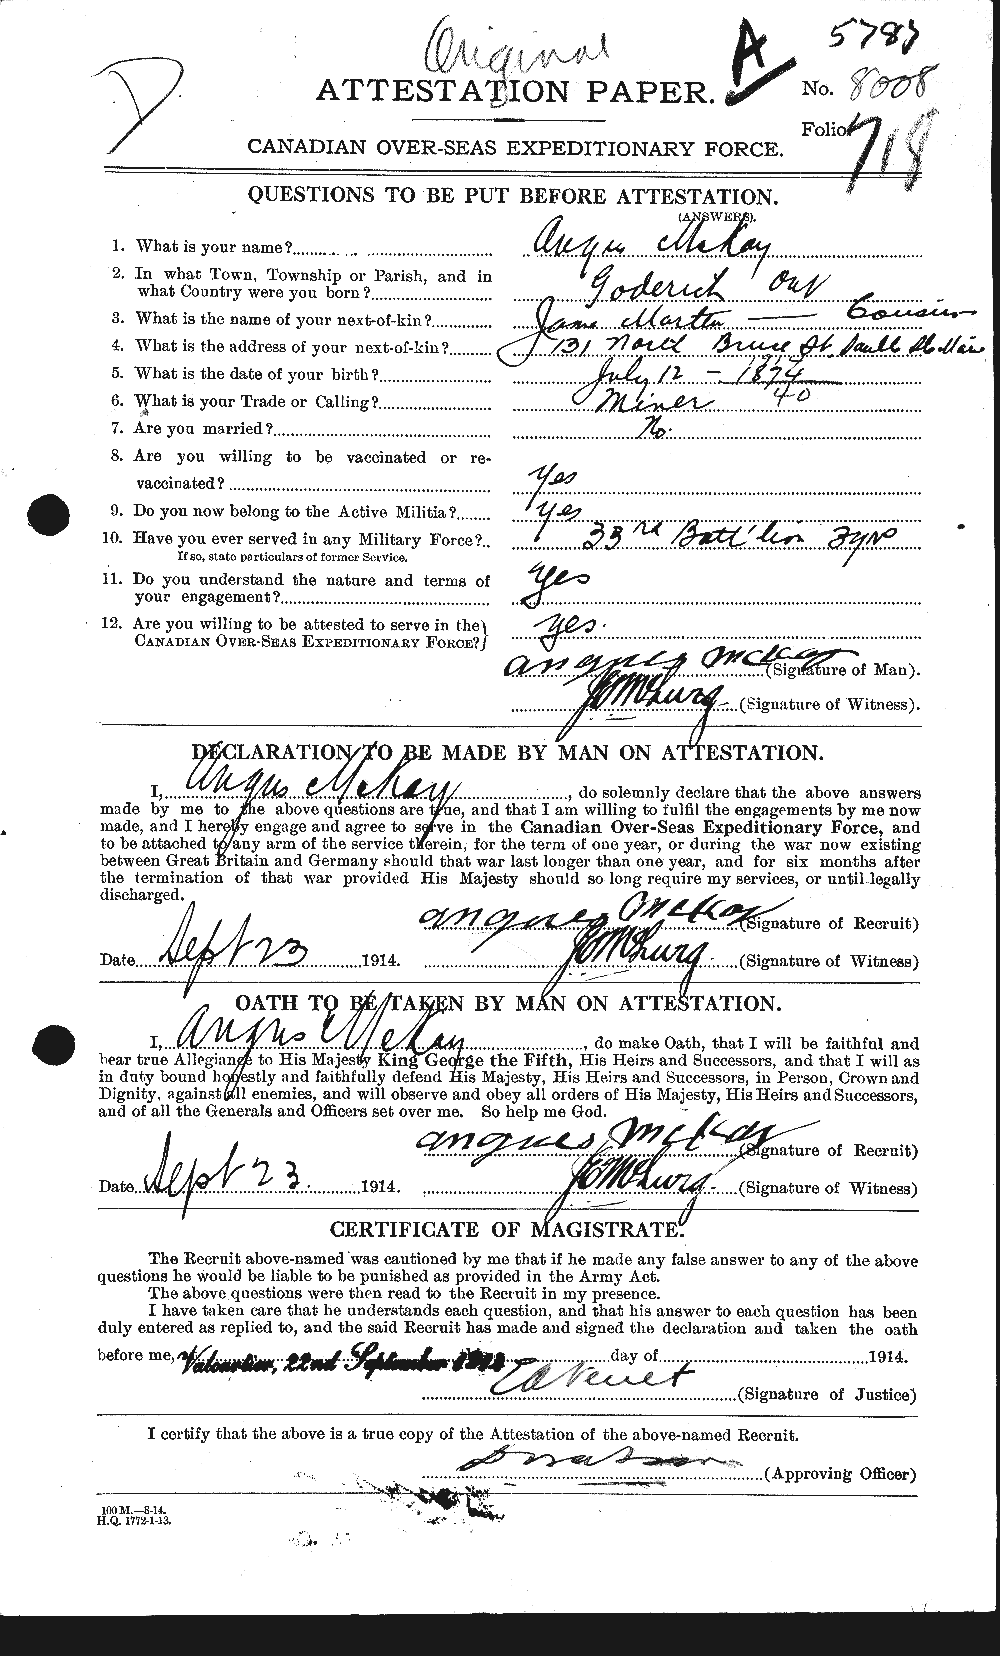 Personnel Records of the First World War - CEF 531000a